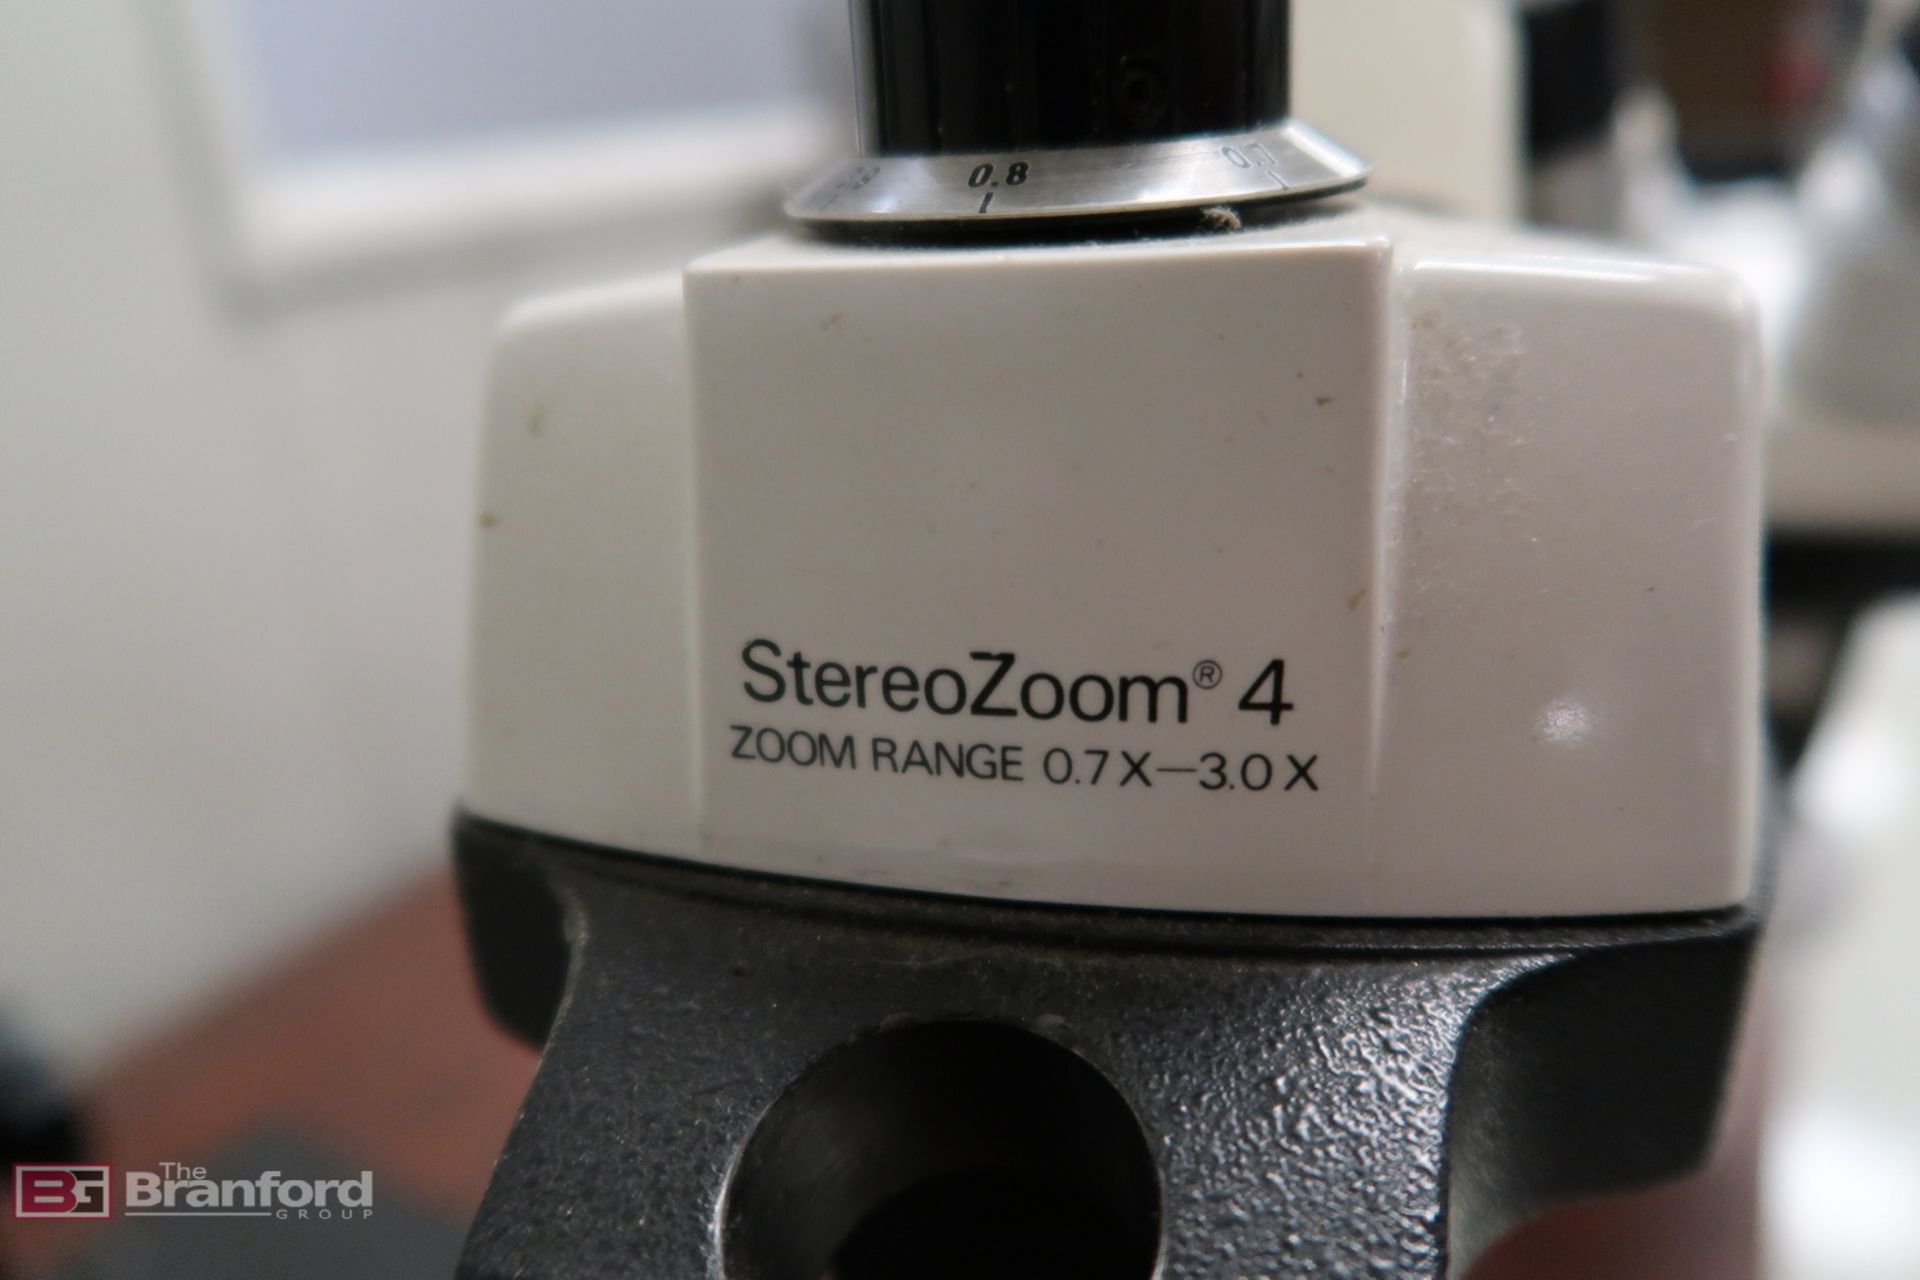 Bausch & Lomb StereoZoom 4 microscope - Image 3 of 3